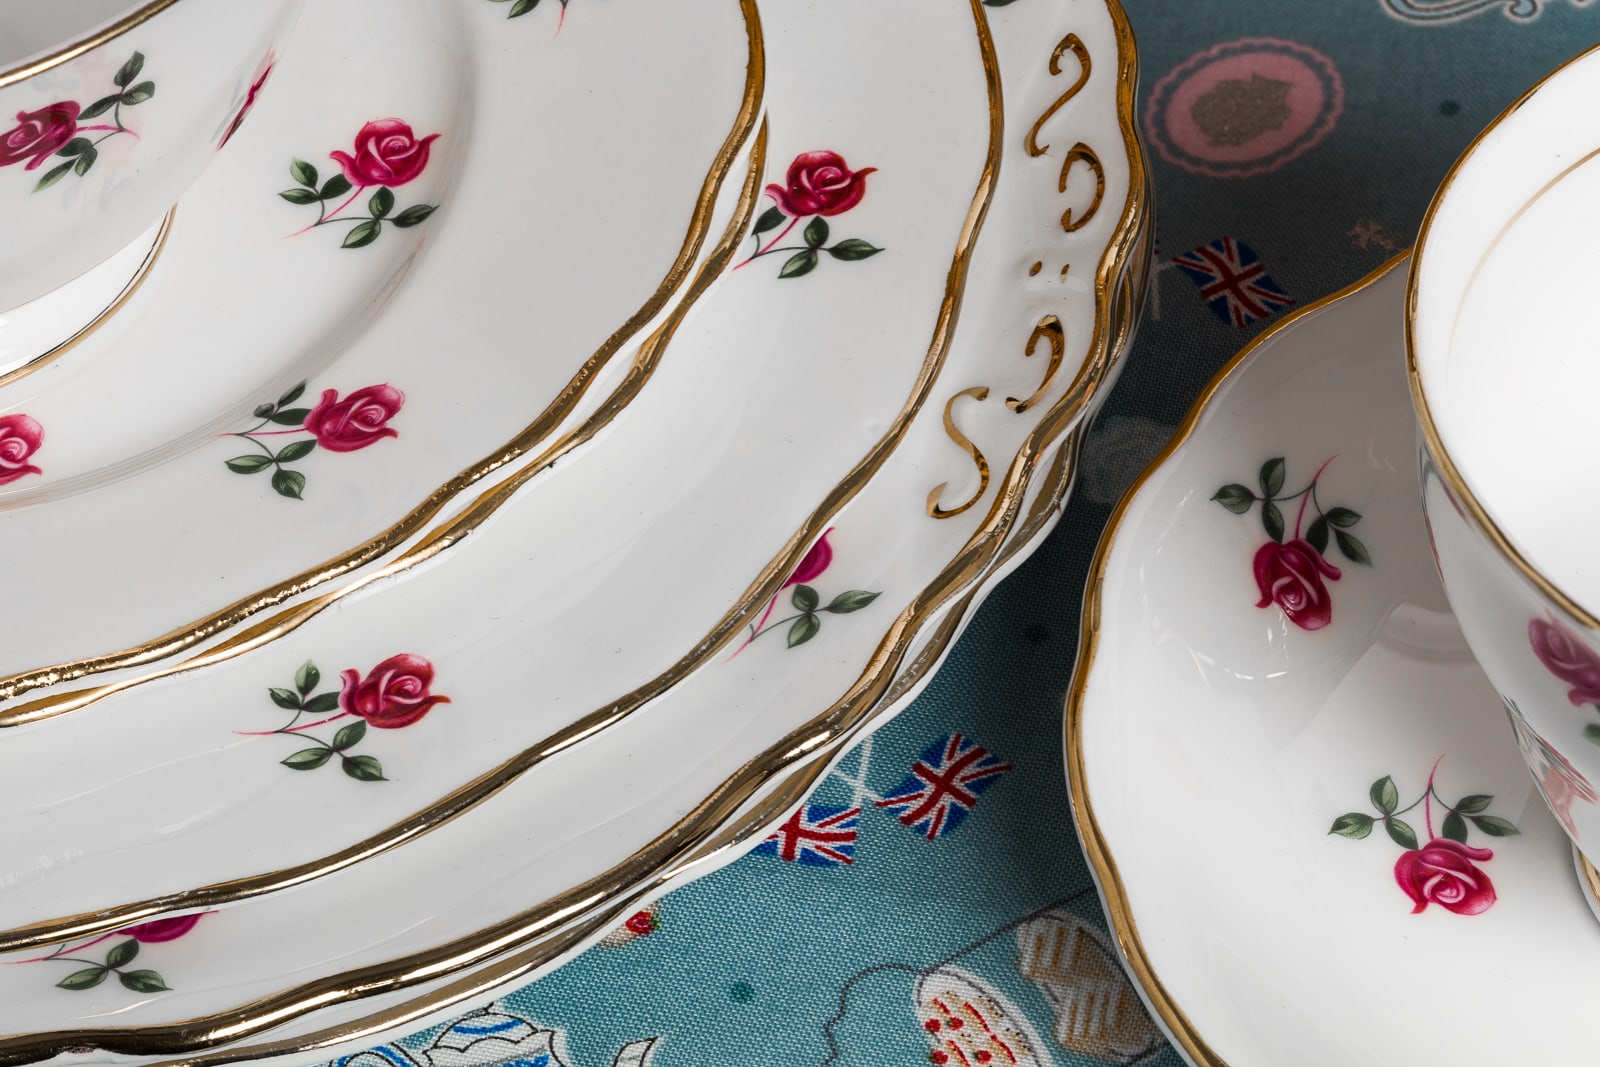 close up of vintage bone china tea set showing details of the small roses and gold finish edging